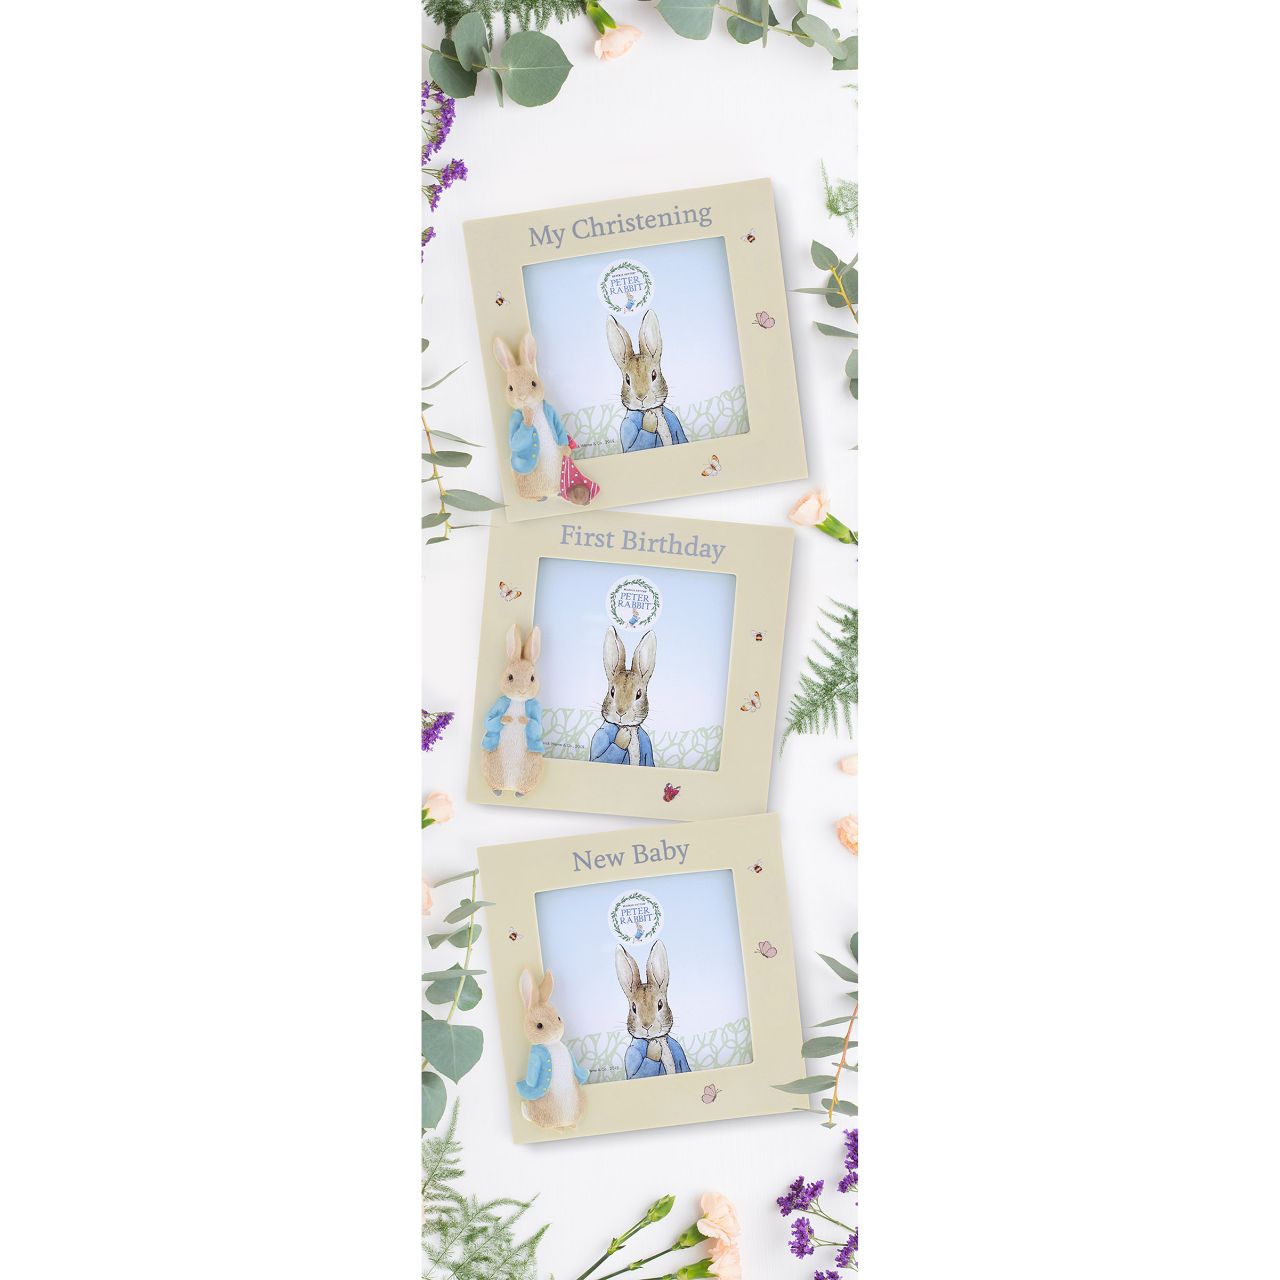 This charming Peter Rabbit My First Birthday Photo frame is the perfect place to display a picture from a birthday celebration and is sure to earn a place of honour on a tabletop or mantel. Complete with original illustrations from the Beatrix Potter stories. Photo frame fits square sized photos.